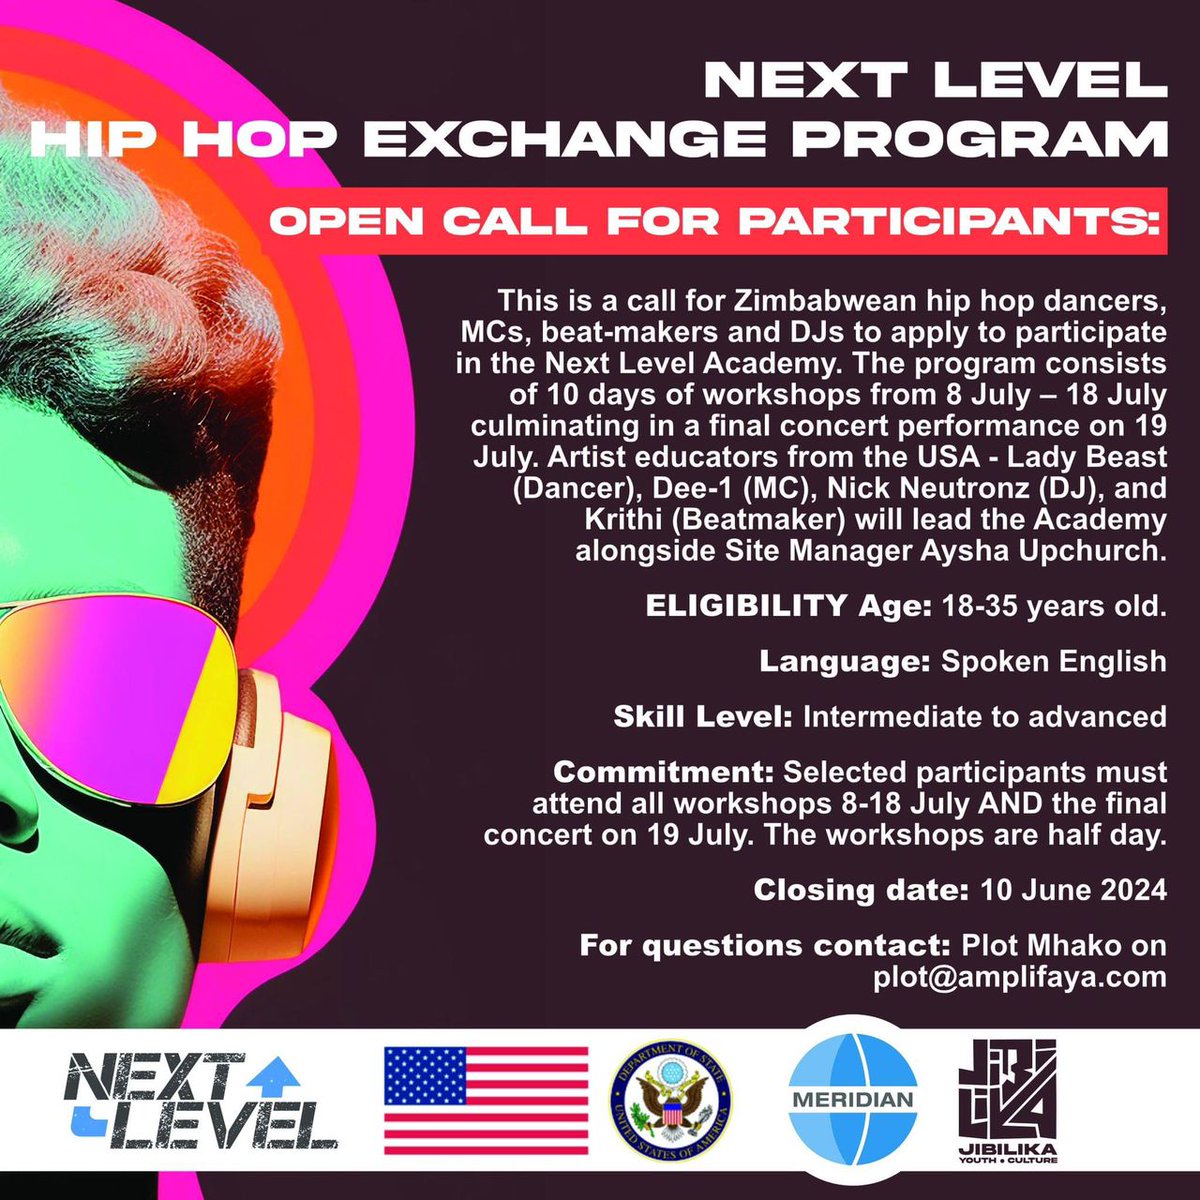 📢Call For Applications!! 📢

Key Details

Deadline🚨:  10 June 2024

 This is a call for Zimbabwean hip hop dancers, MCs, beat-makers and DJs to apply to participate in the Next Level Academy. The program consists of 10 days of workshops from 8 July – 18 July culminating in a